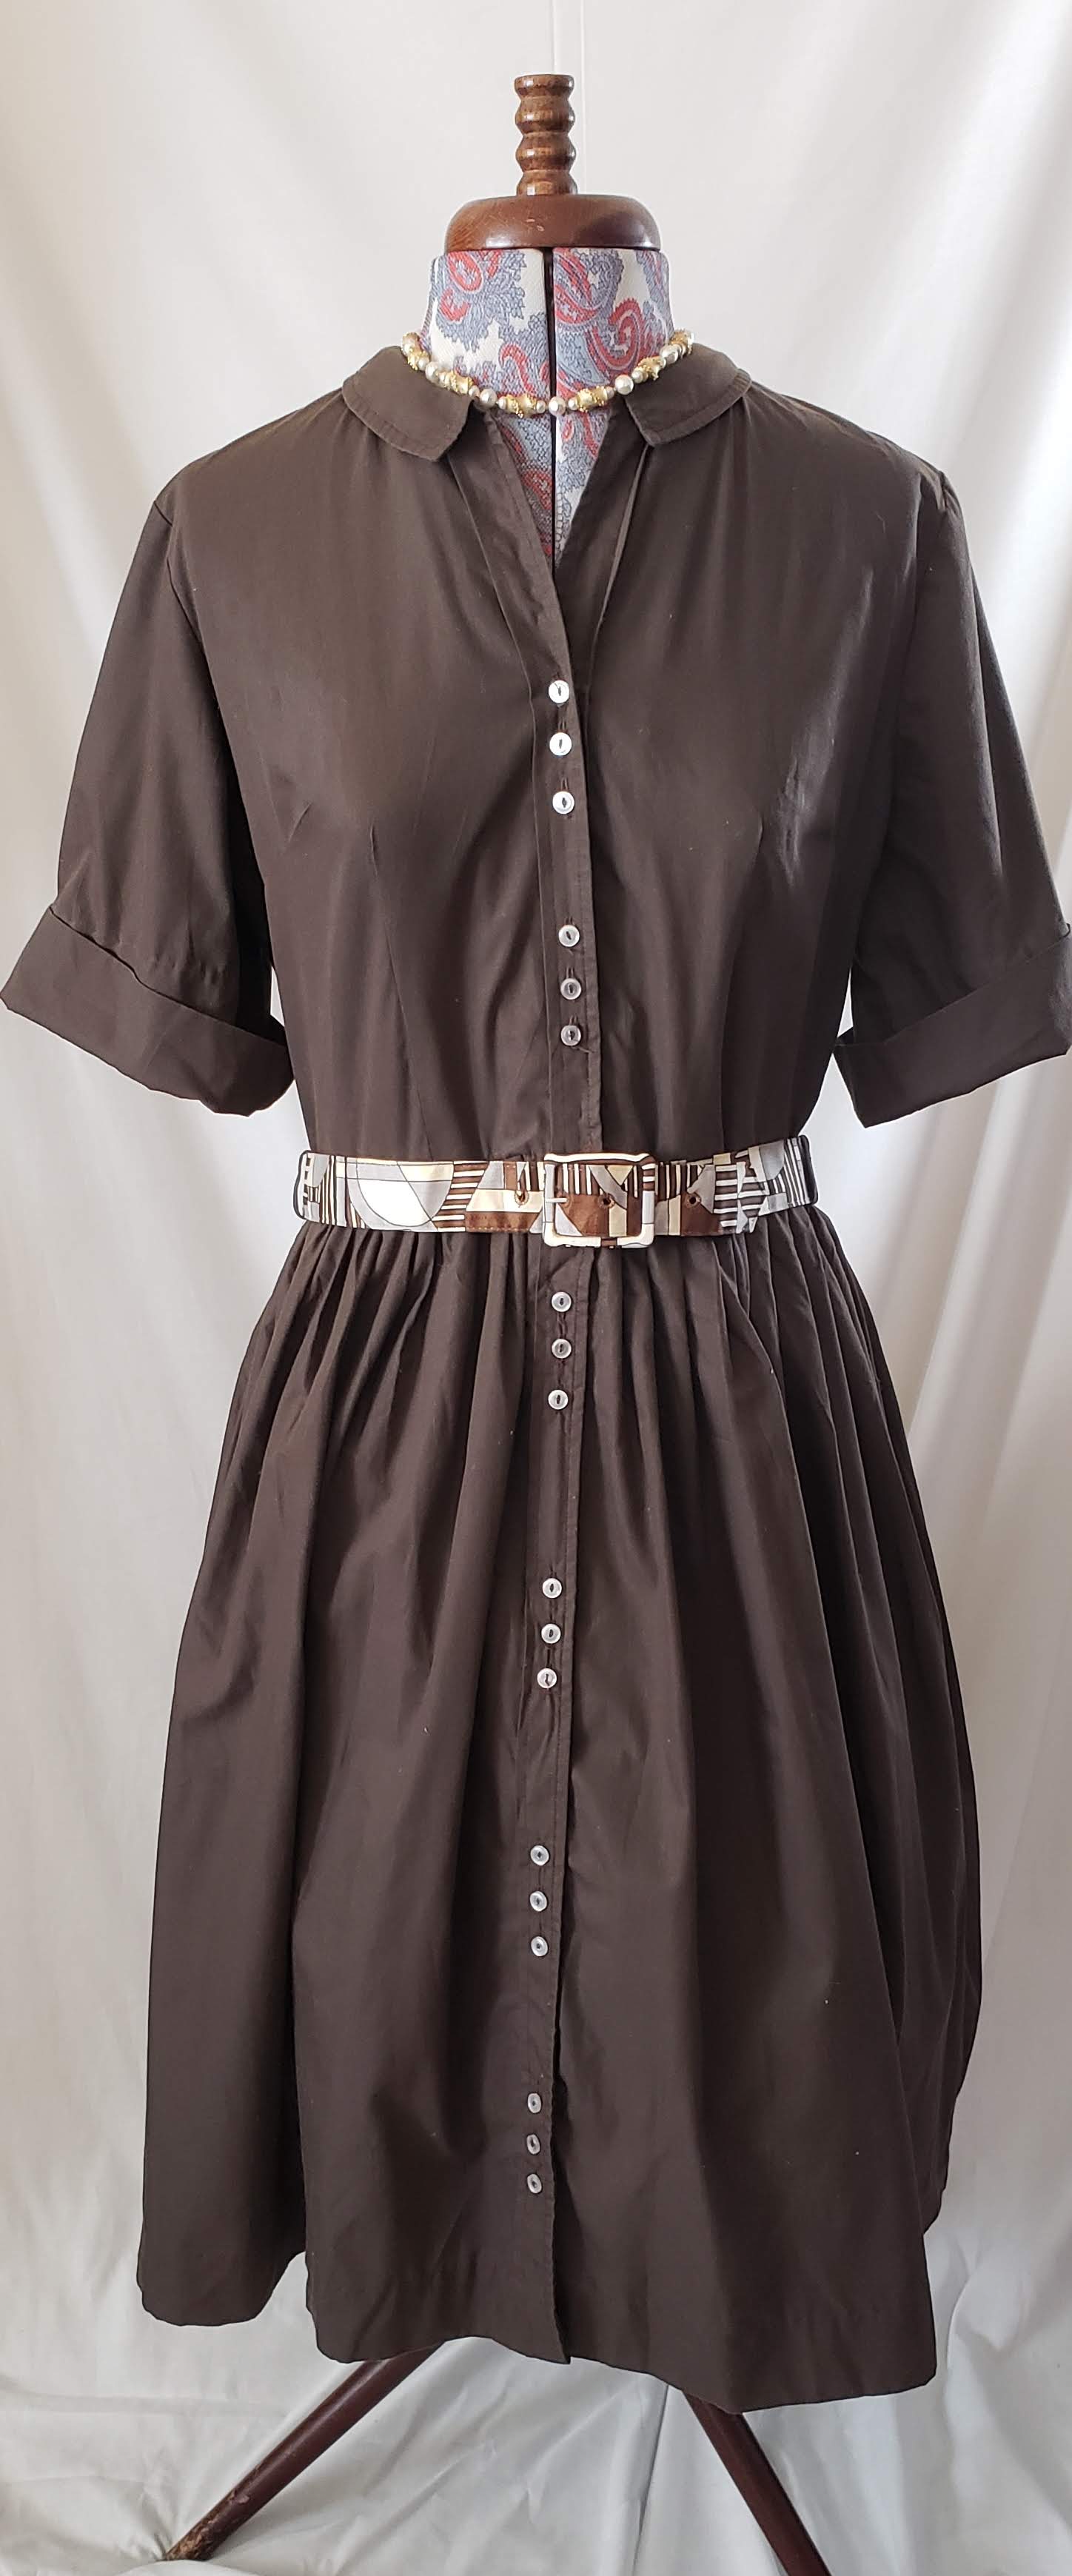 Vintage Chocolate Brown Adele Fashions Full Button Dress